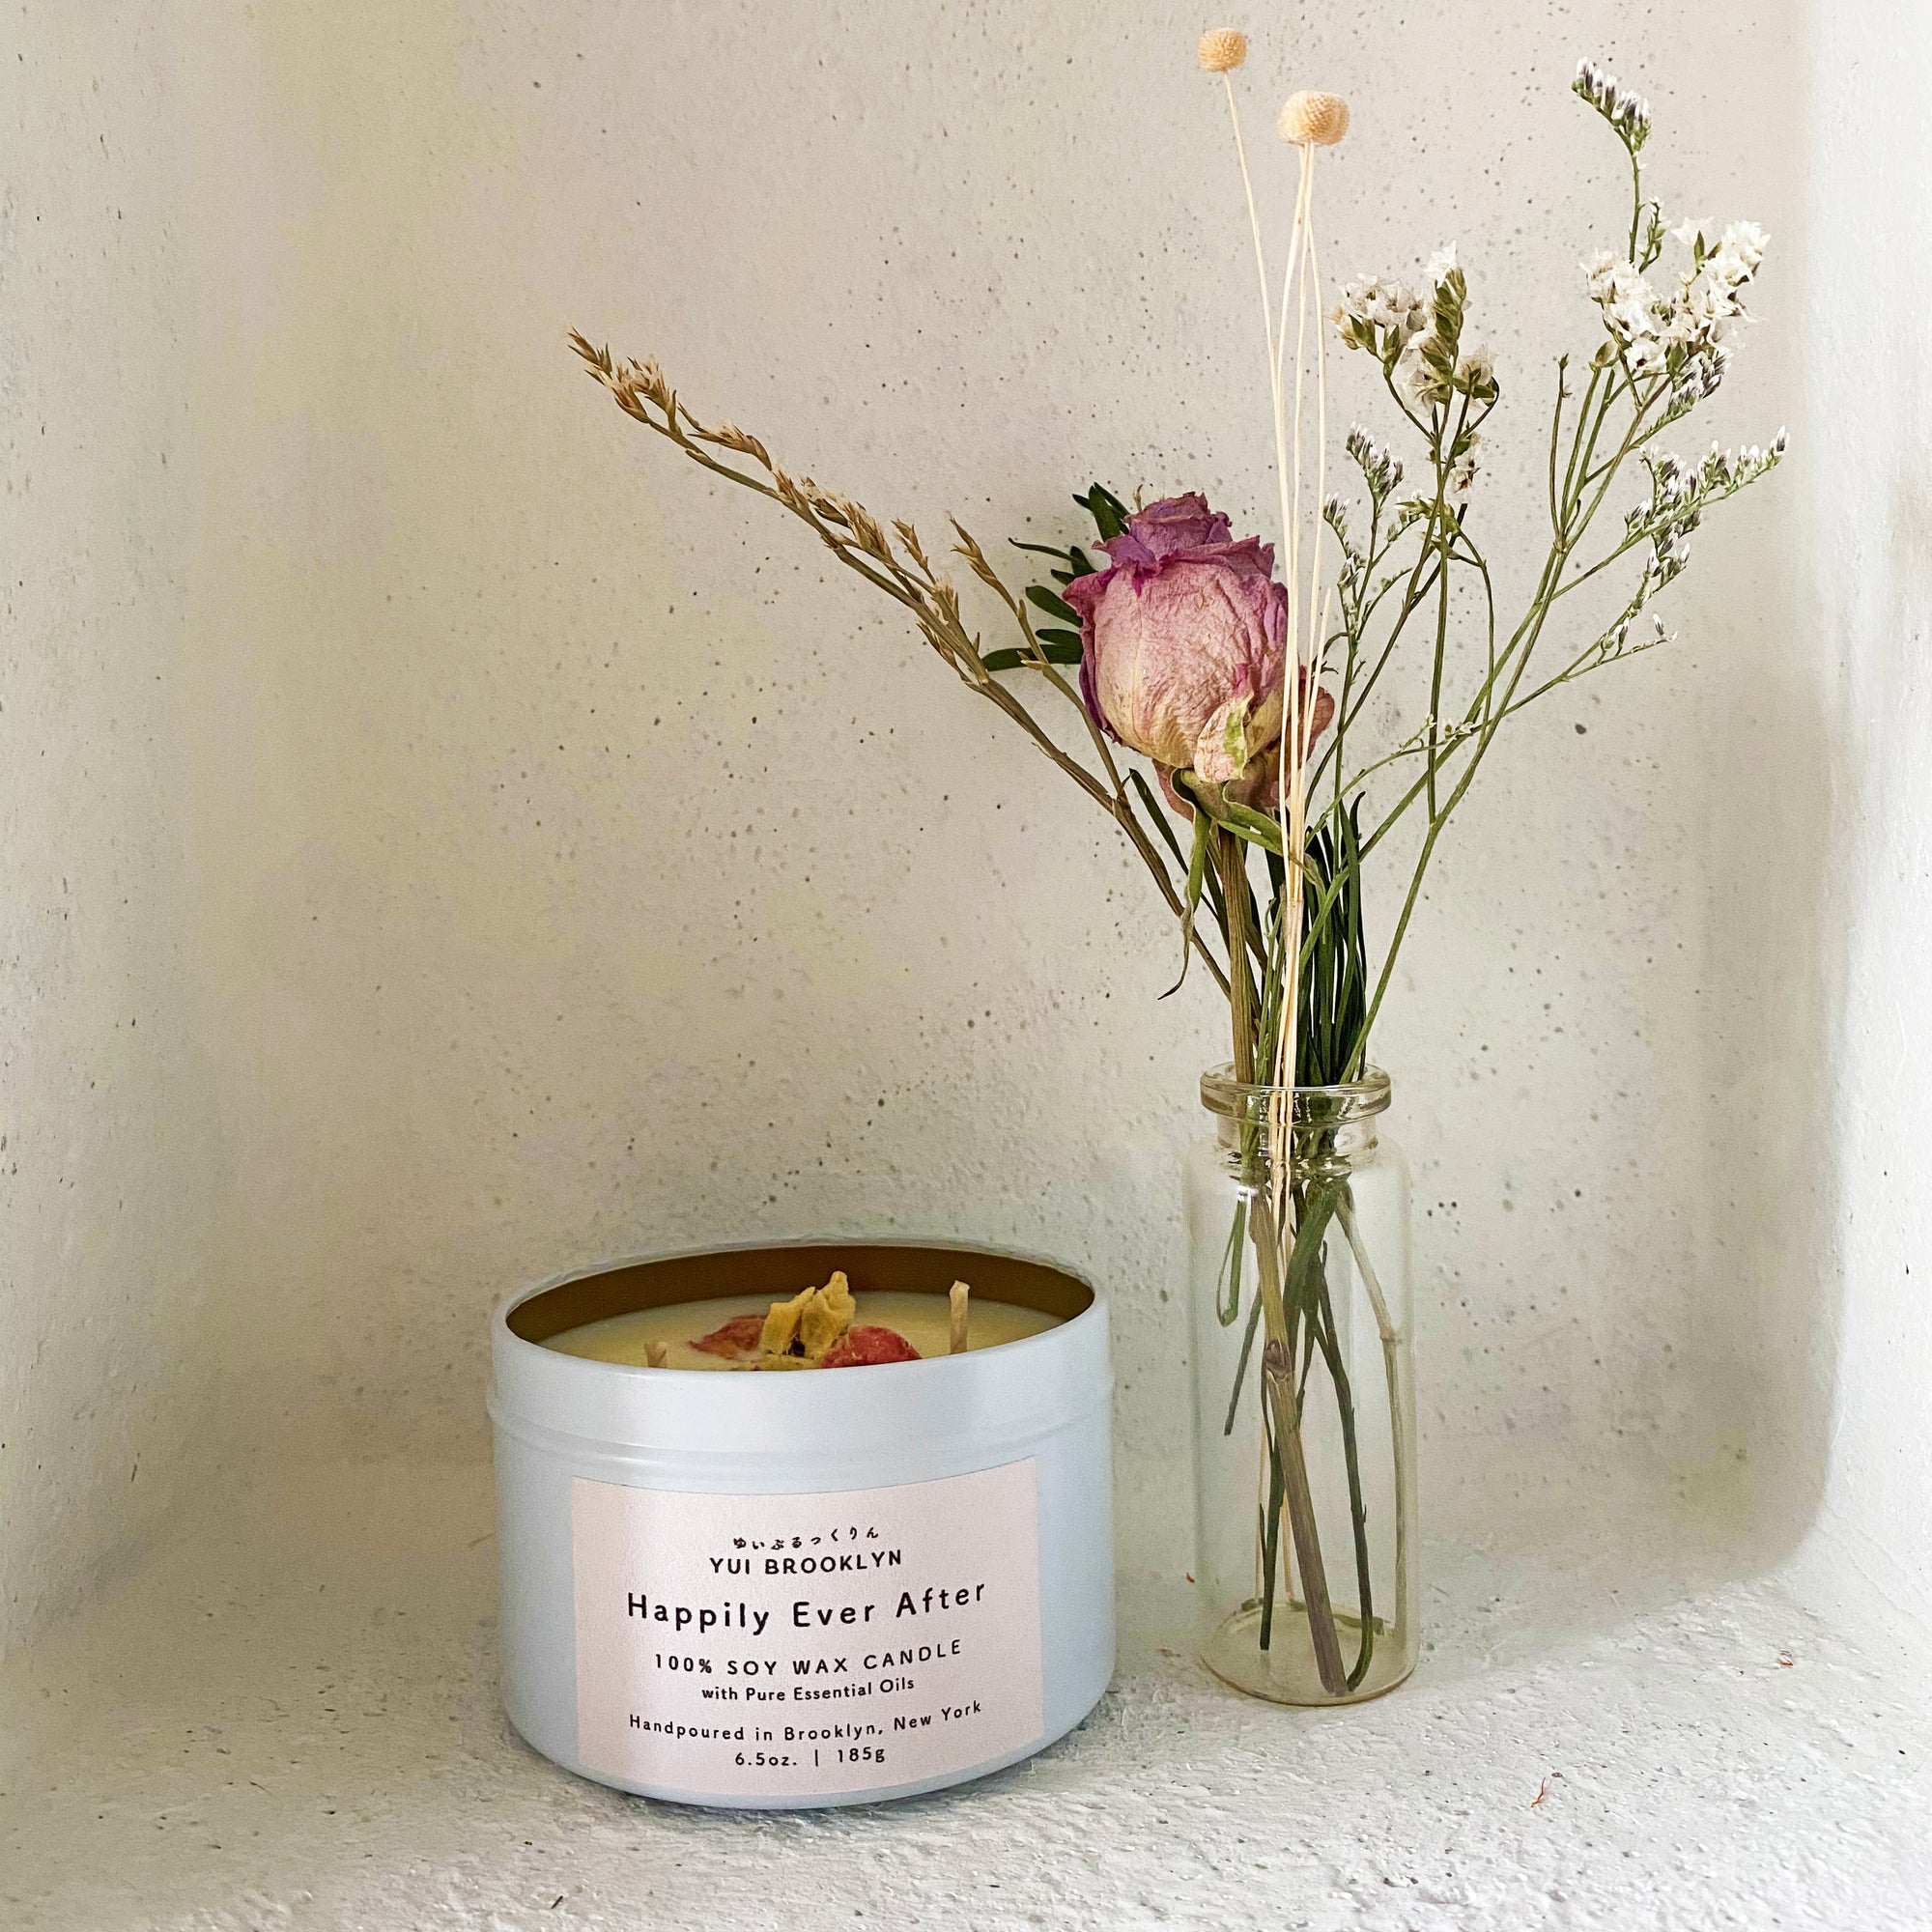 Happily Ever After Signature Candle